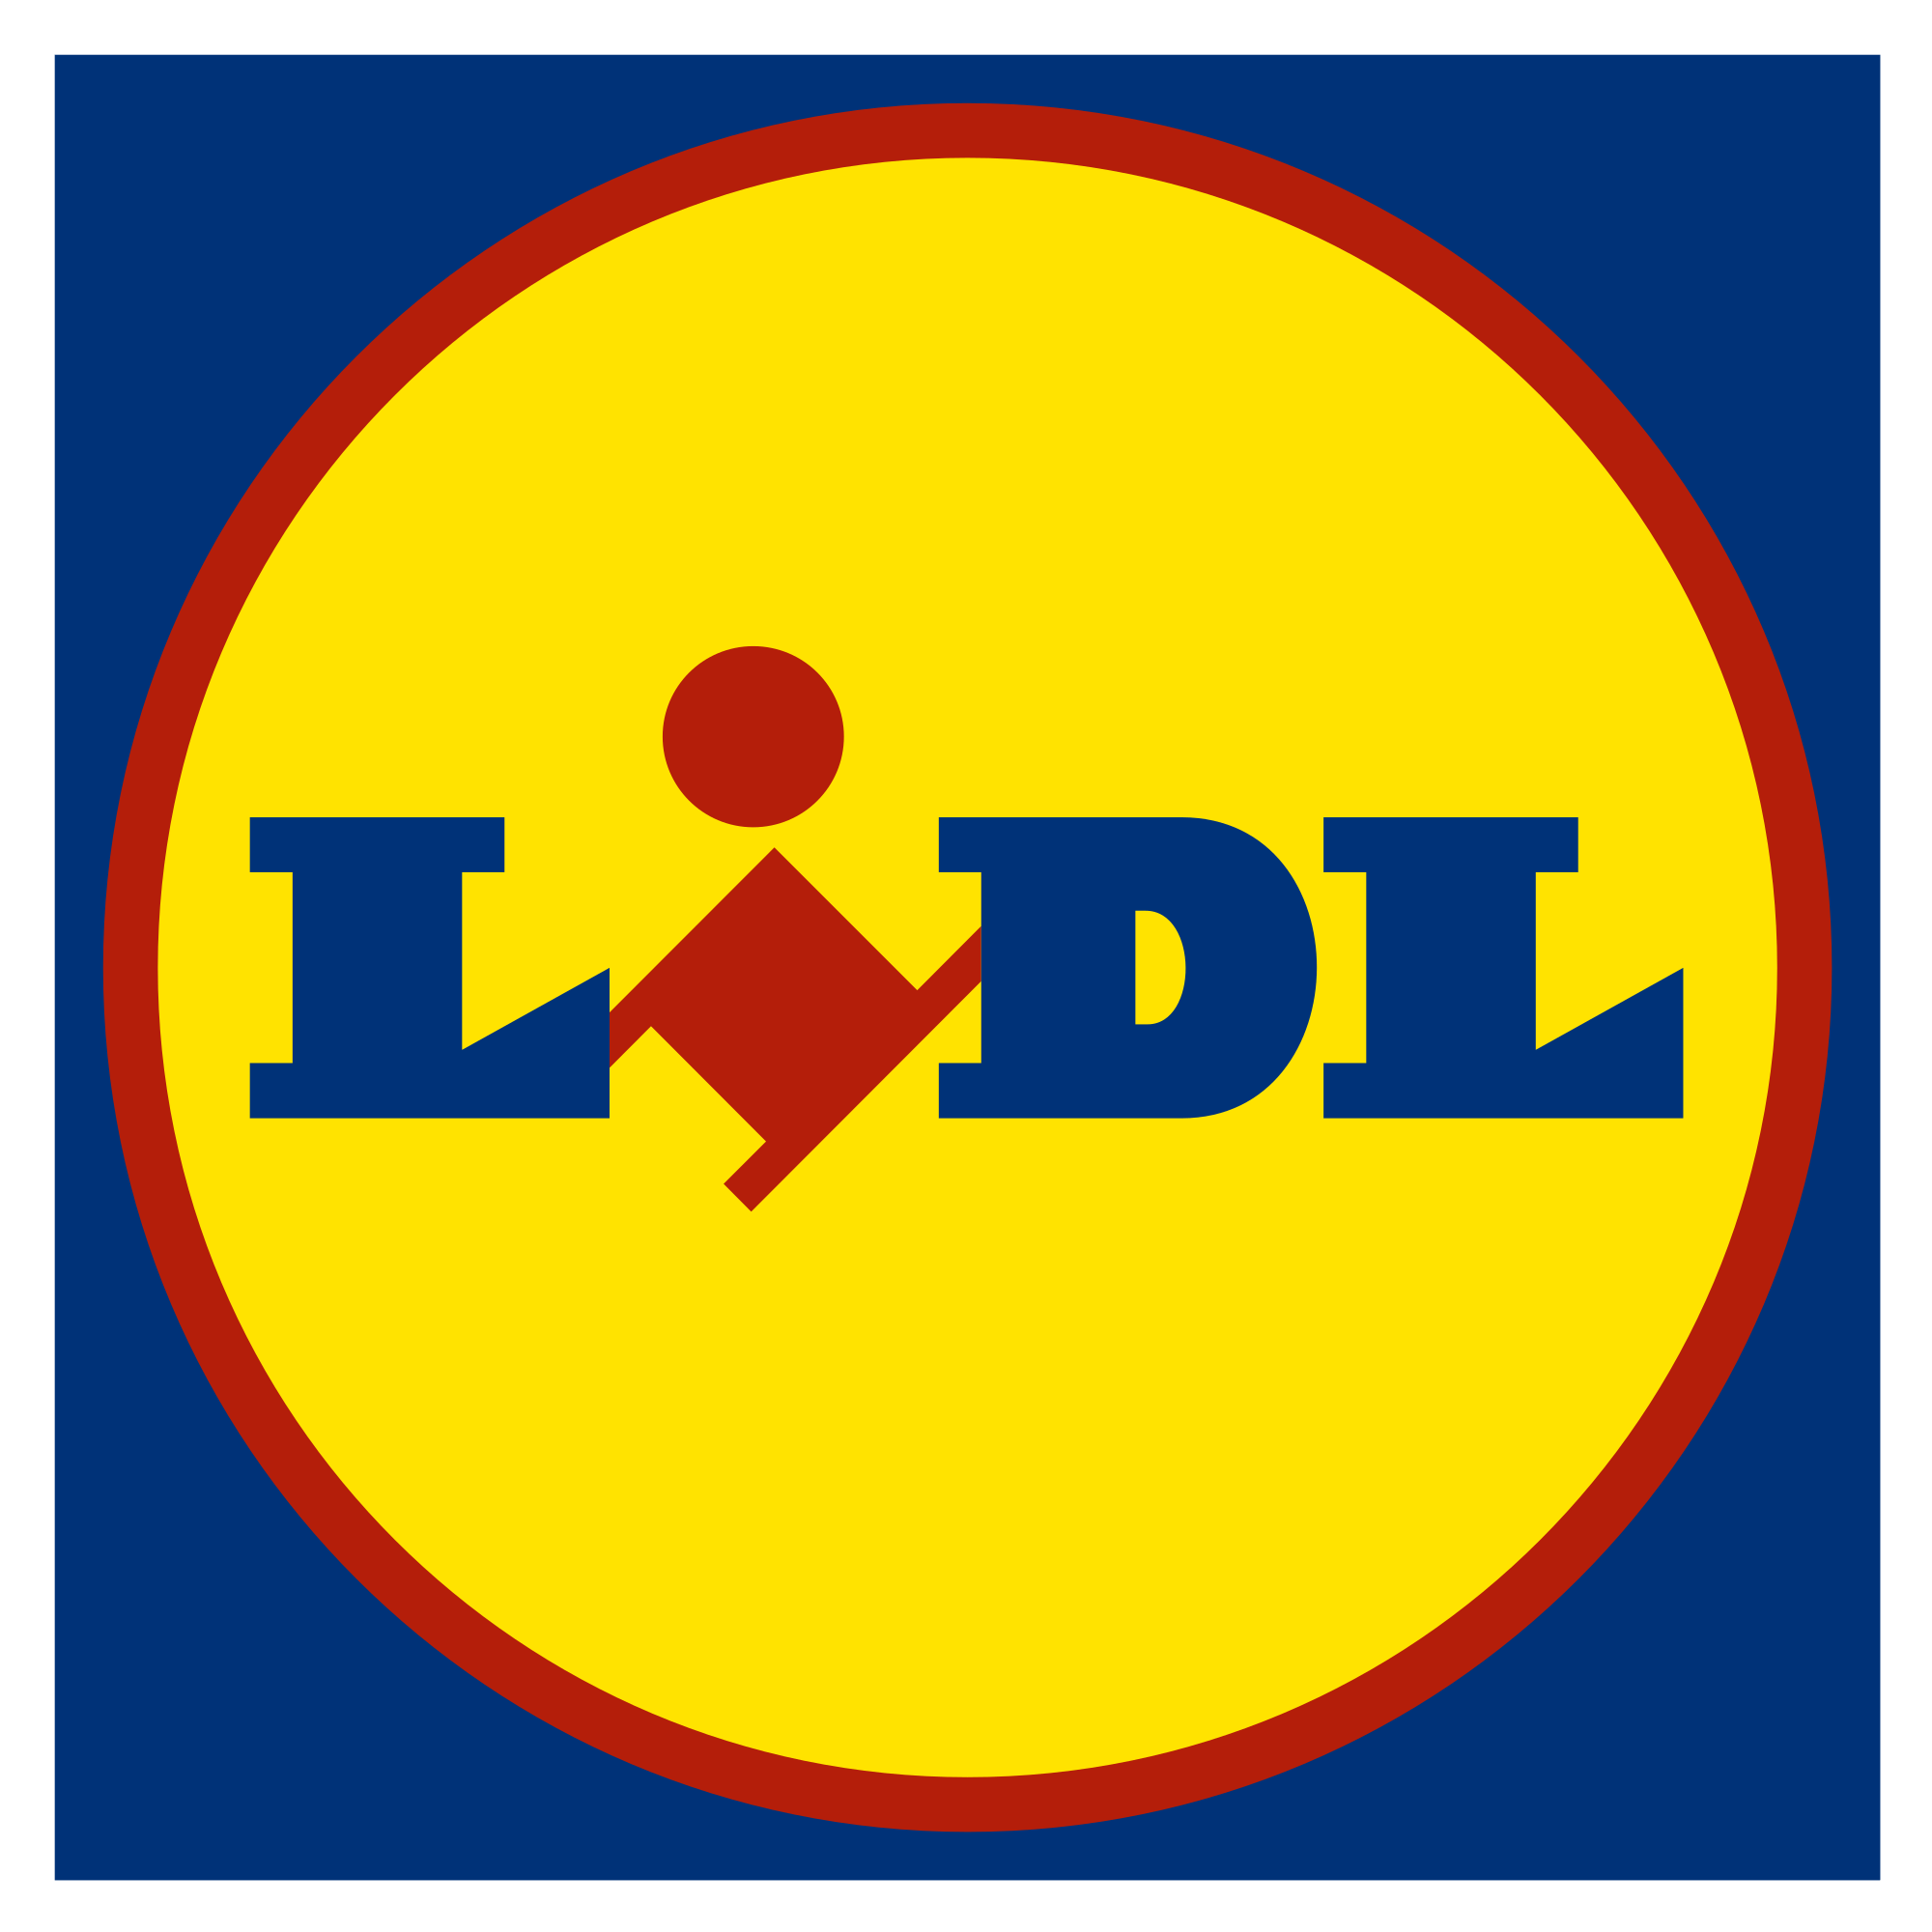 Blue and Yellow Sign Logo - File:Lidl-Logo.svg - Wikimedia Commons